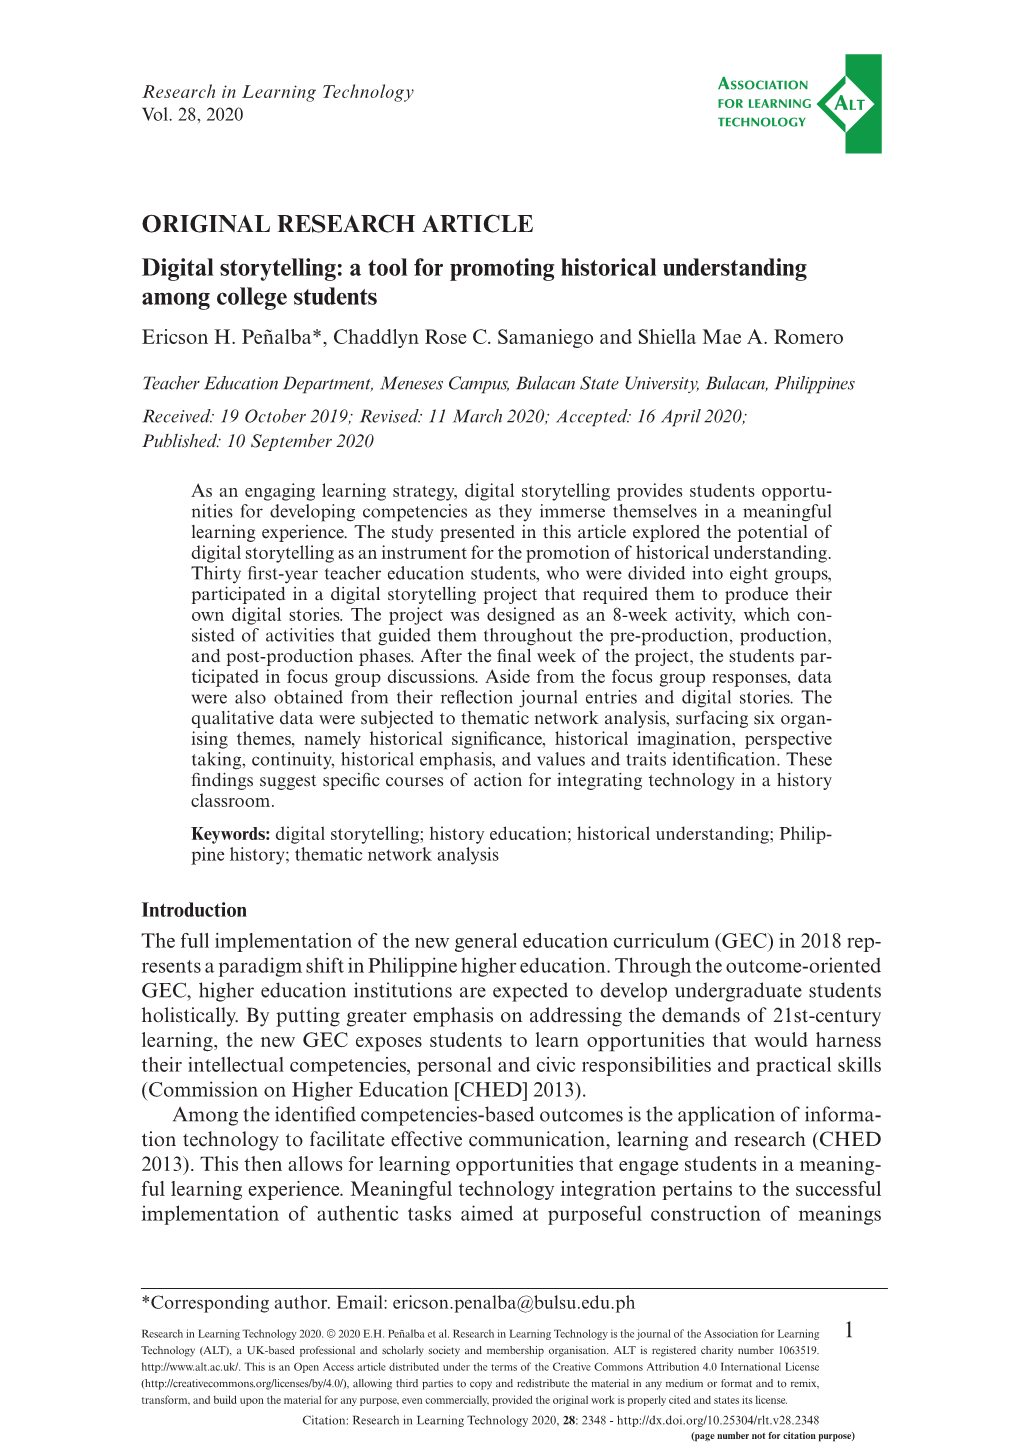 ORIGINAL RESEARCH ARTICLE Digital Storytelling: a Tool for Promoting Historical Understanding Among College Students Ericson H